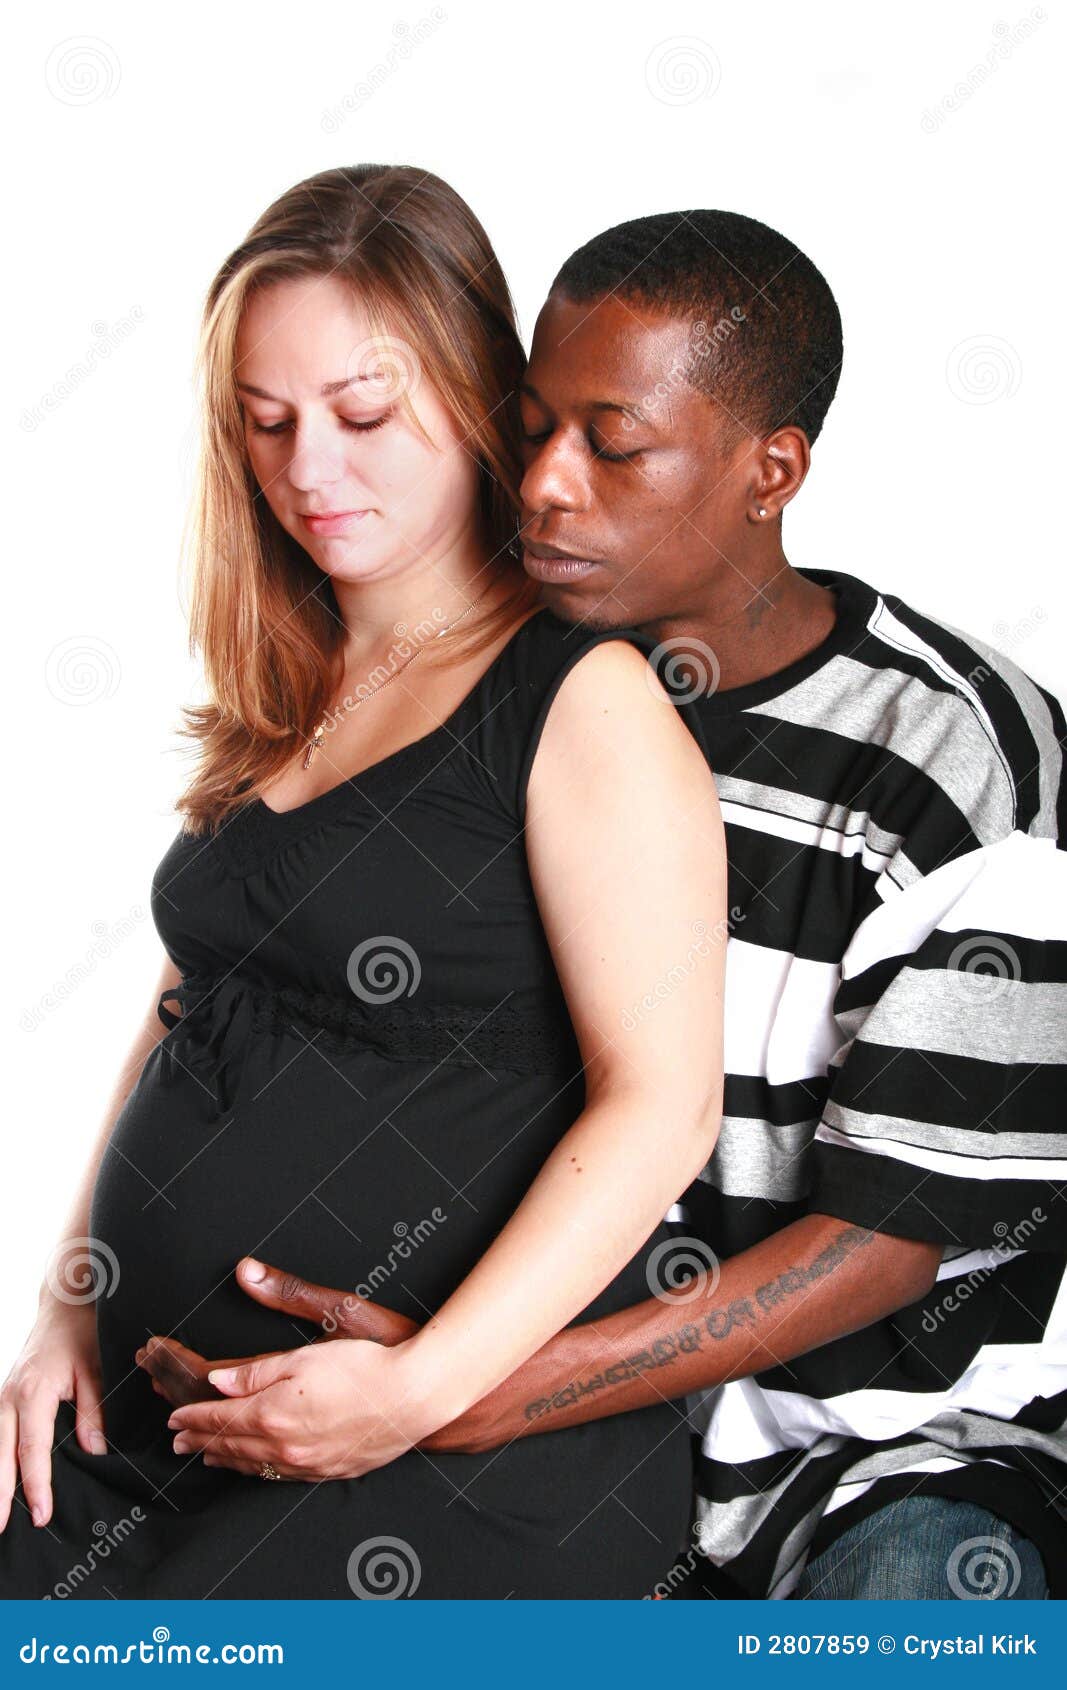 Interracial Relationships Porn - White couples interracial pregnant - Porn pictures